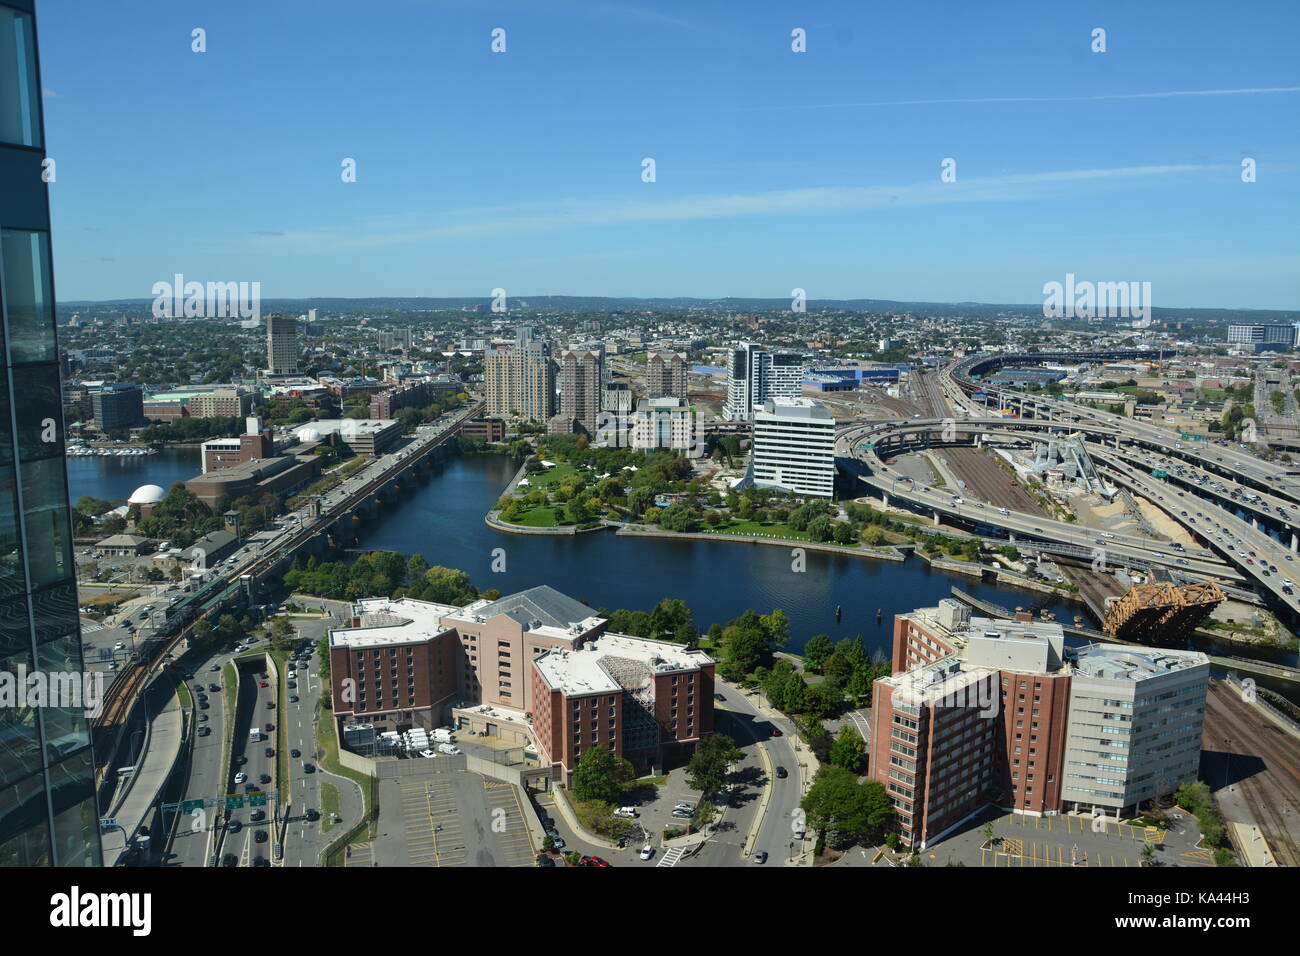 The Bunker Hill Memorial Leonard P. Zakim bridge in Boston, and points North seen from atop of a skyscraper in the West End on a sunny day. Stock Photo